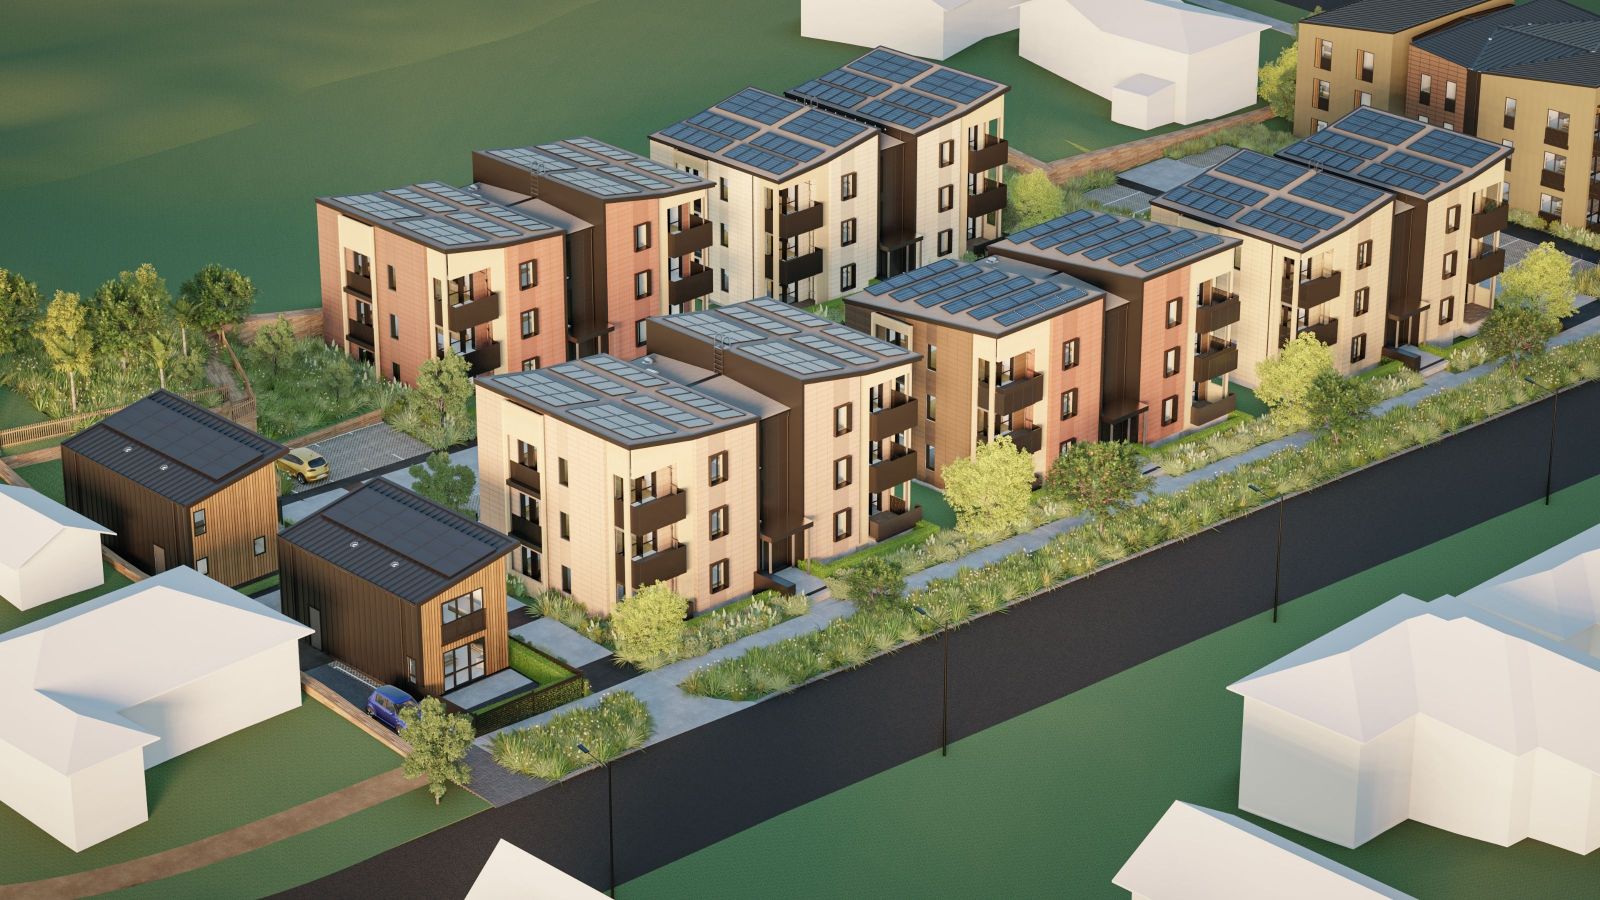 drawing of housing units with solar panels